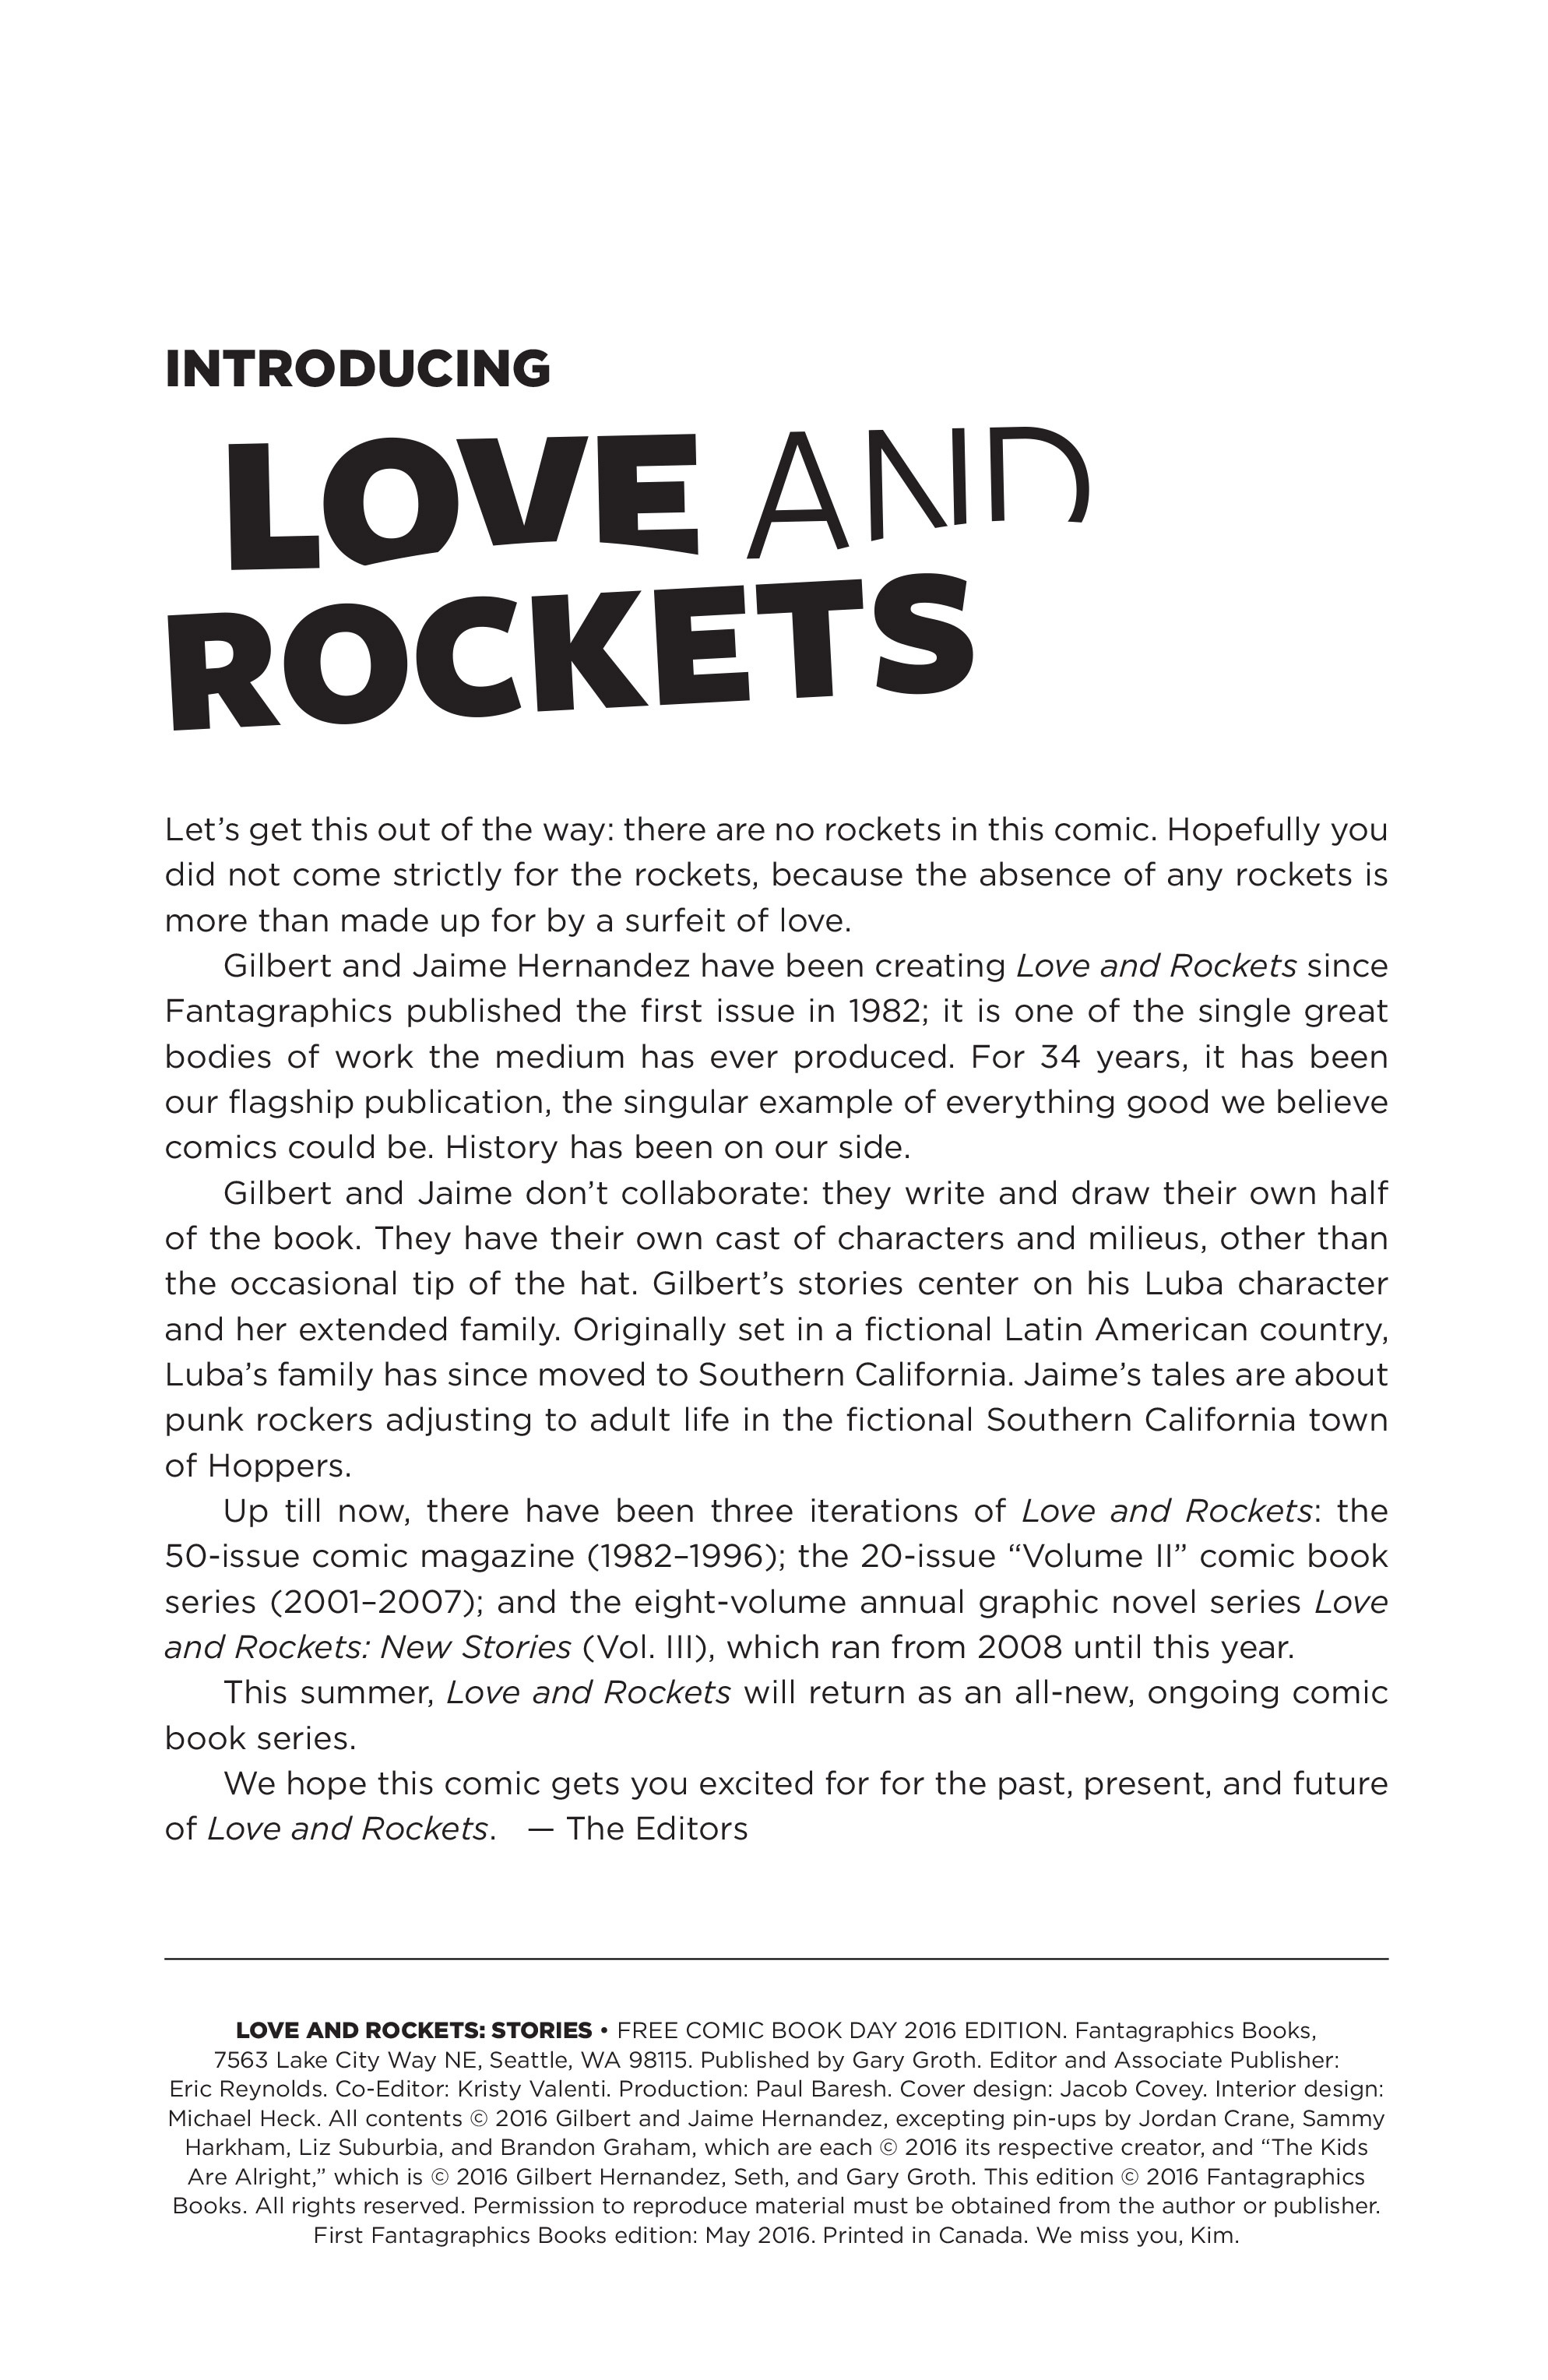 Read online Free Comic Book Day 2016 comic -  Issue # Love and Rockets Sampler - 2